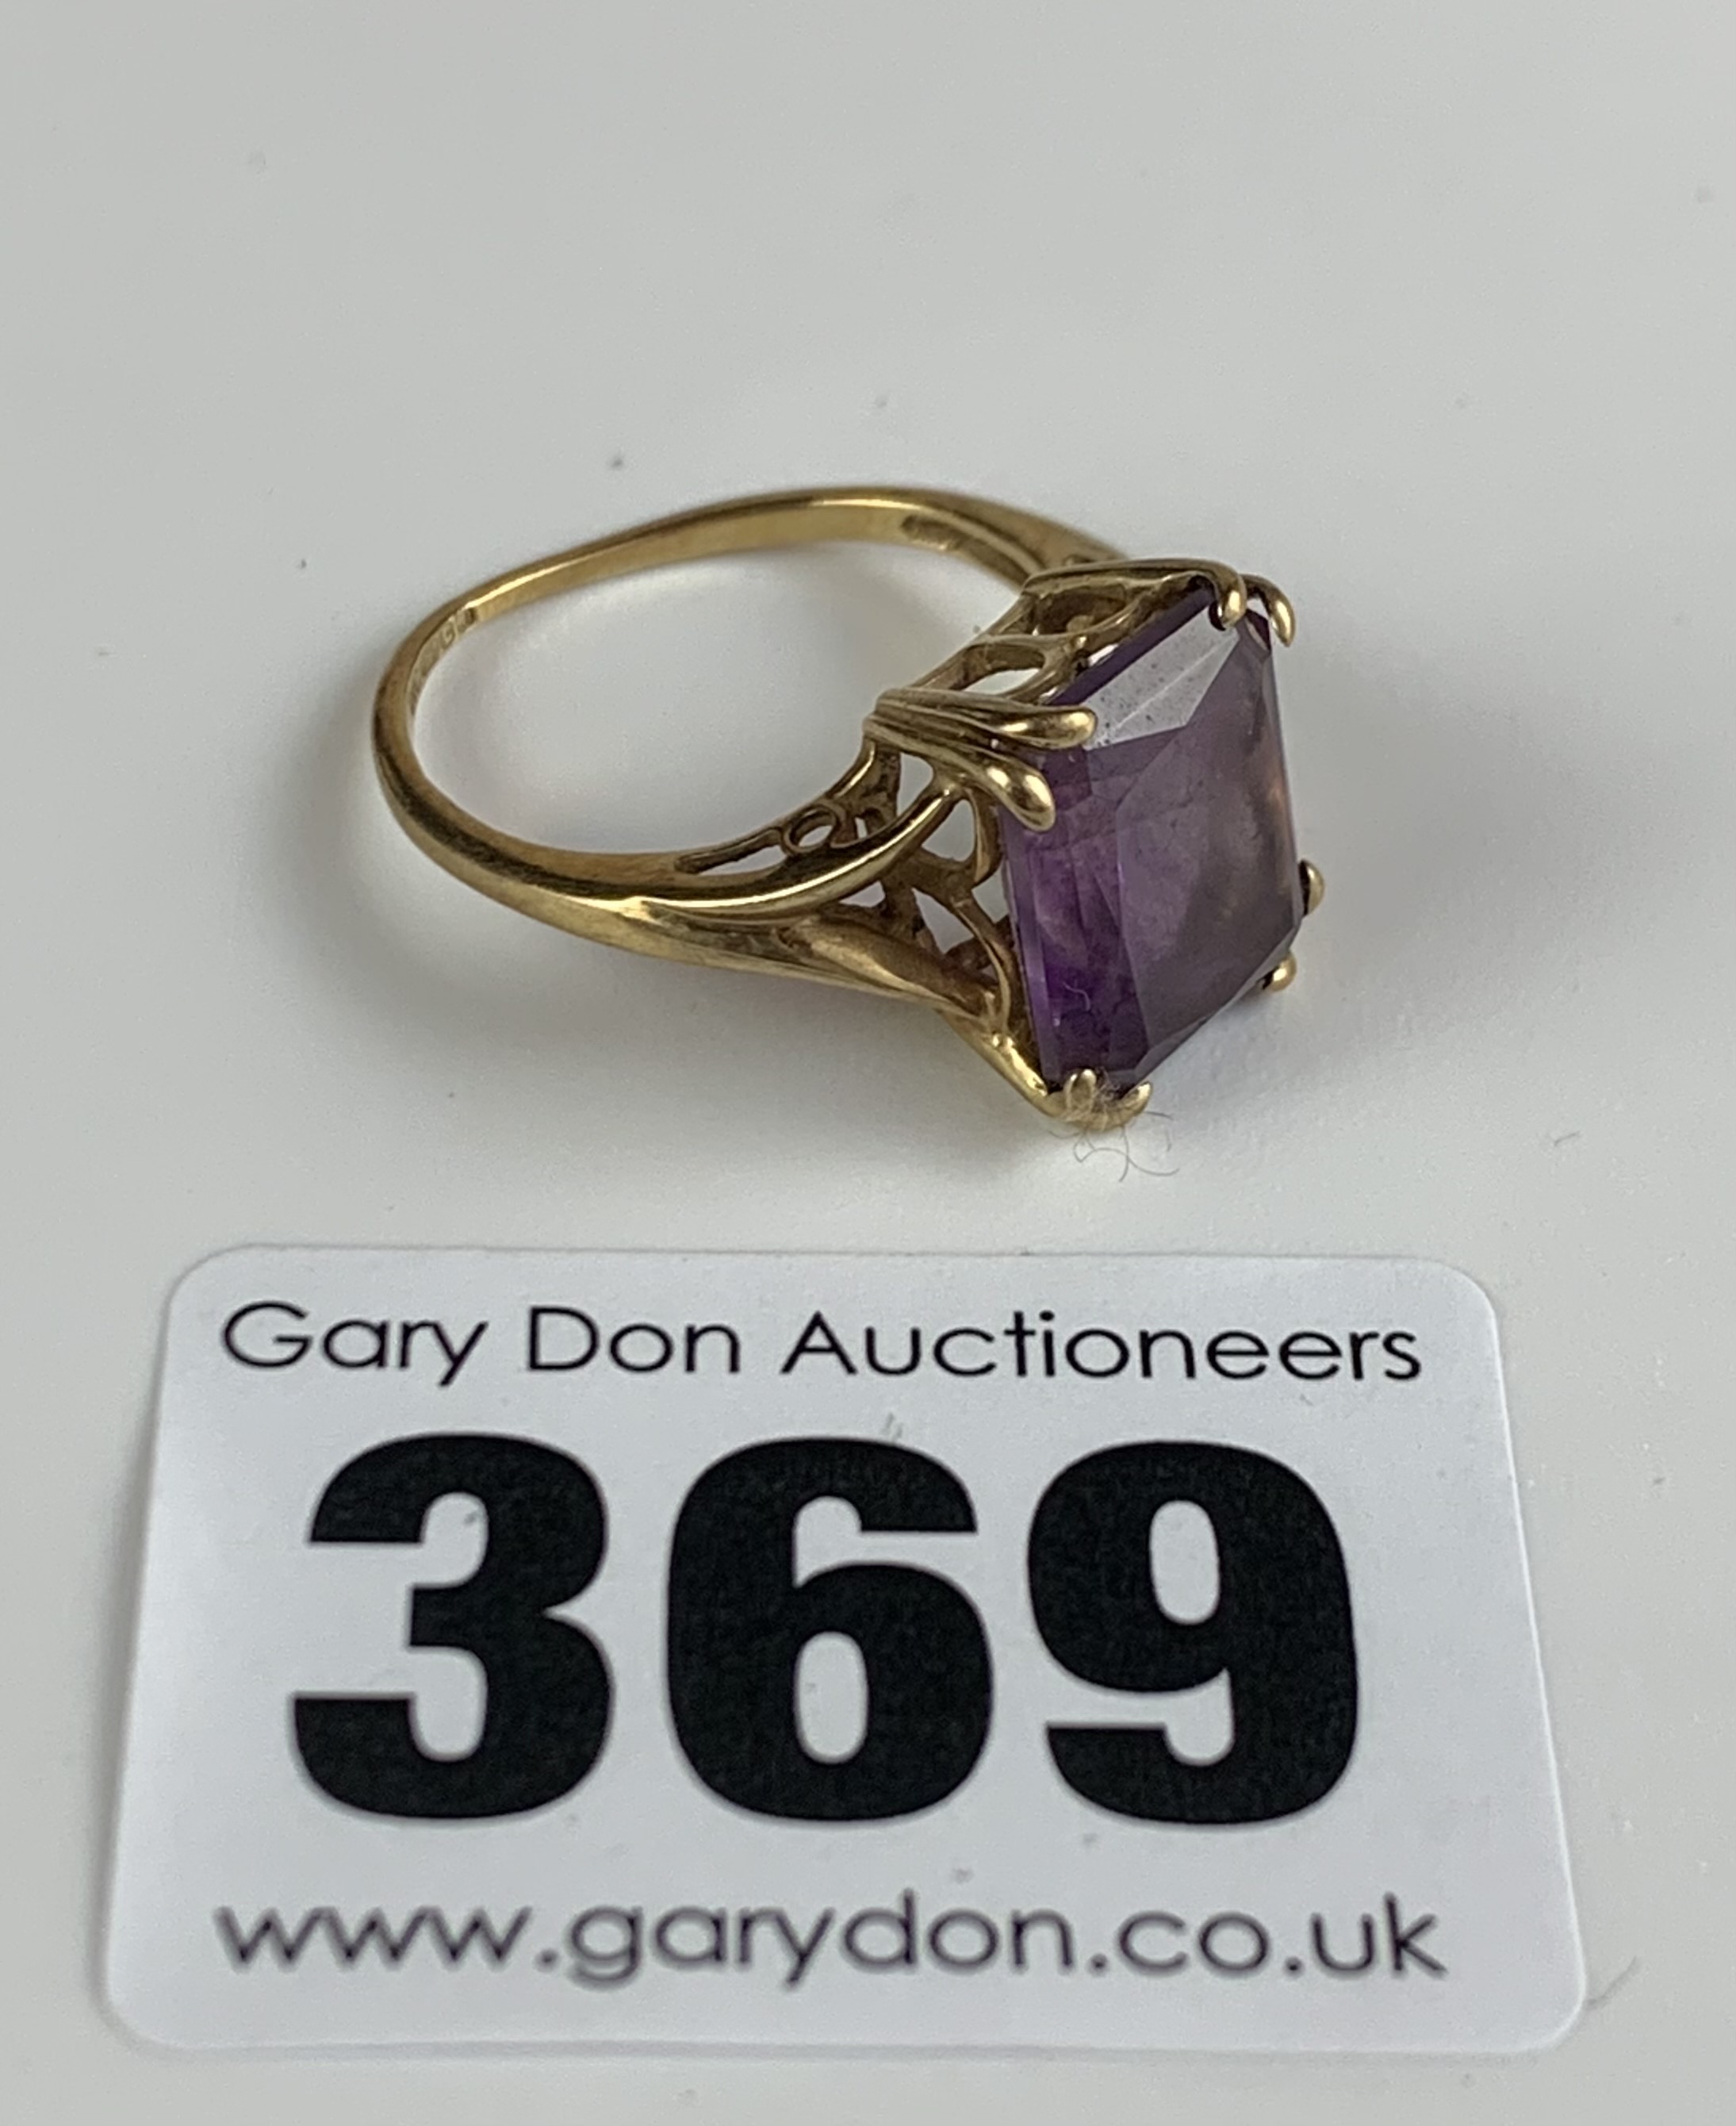 9k gold ring with purple stone, size L, w: 2.6 gms - Image 4 of 6